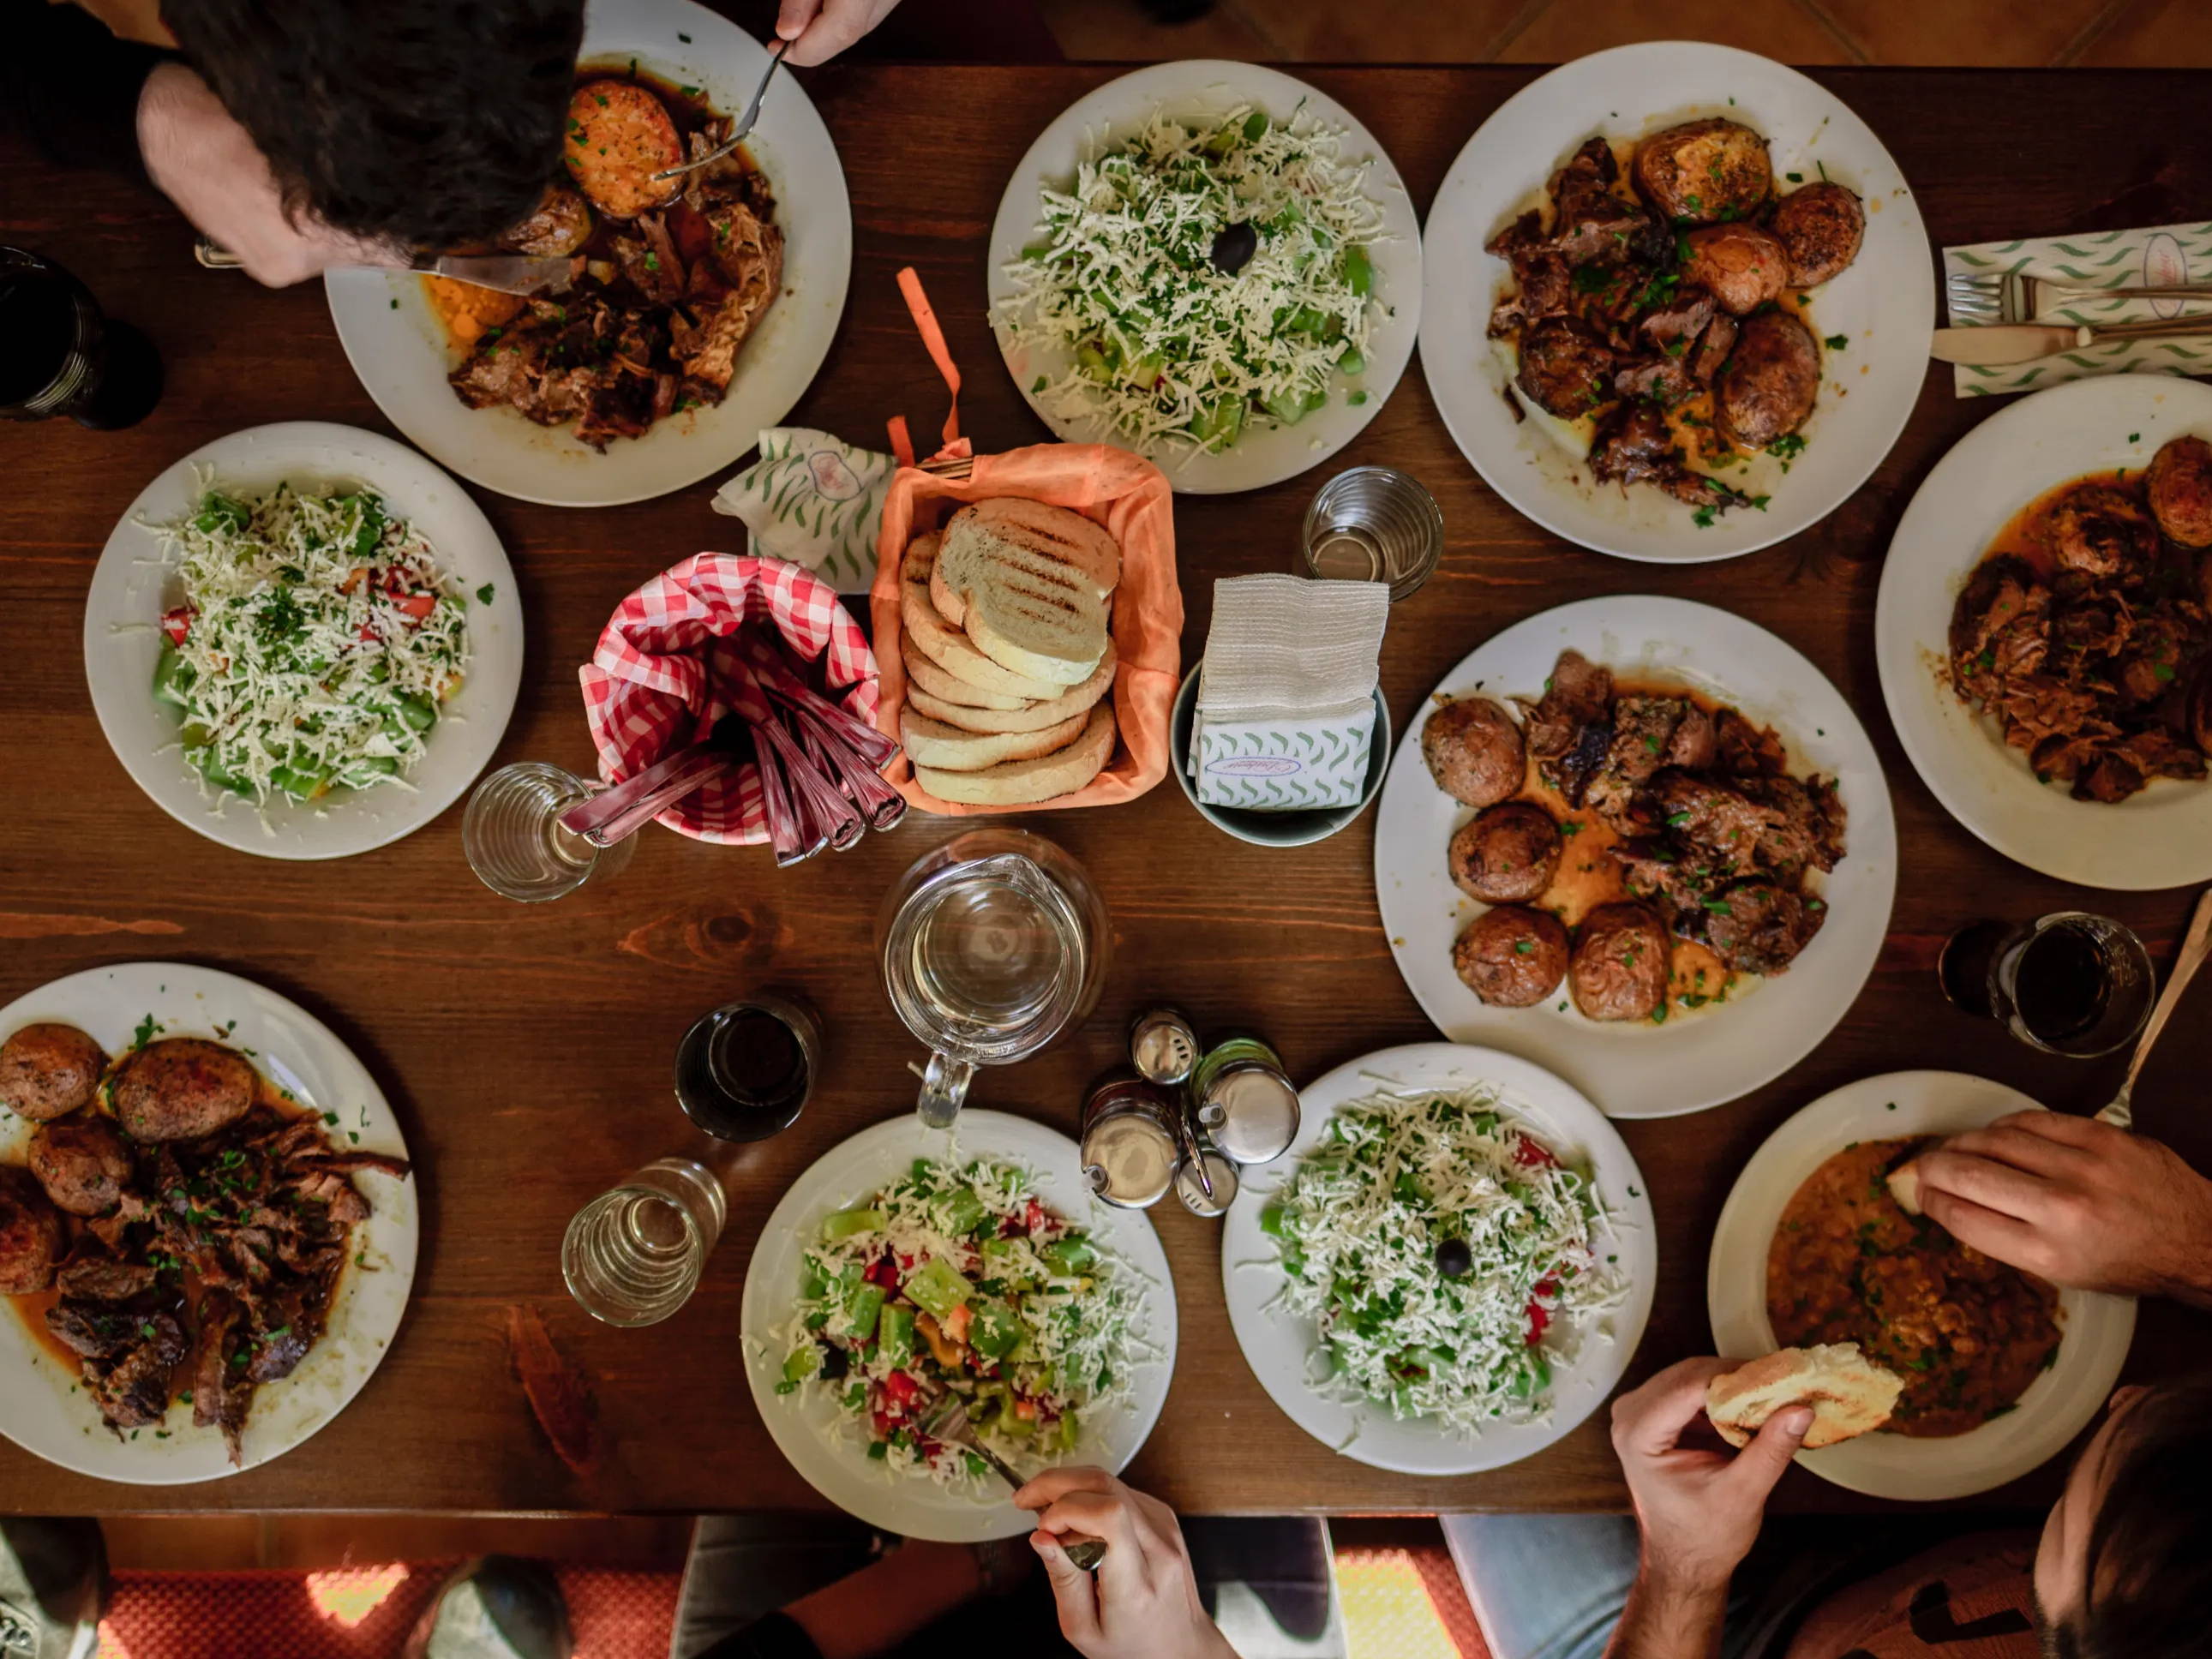 Overhead shot of people eating around a table